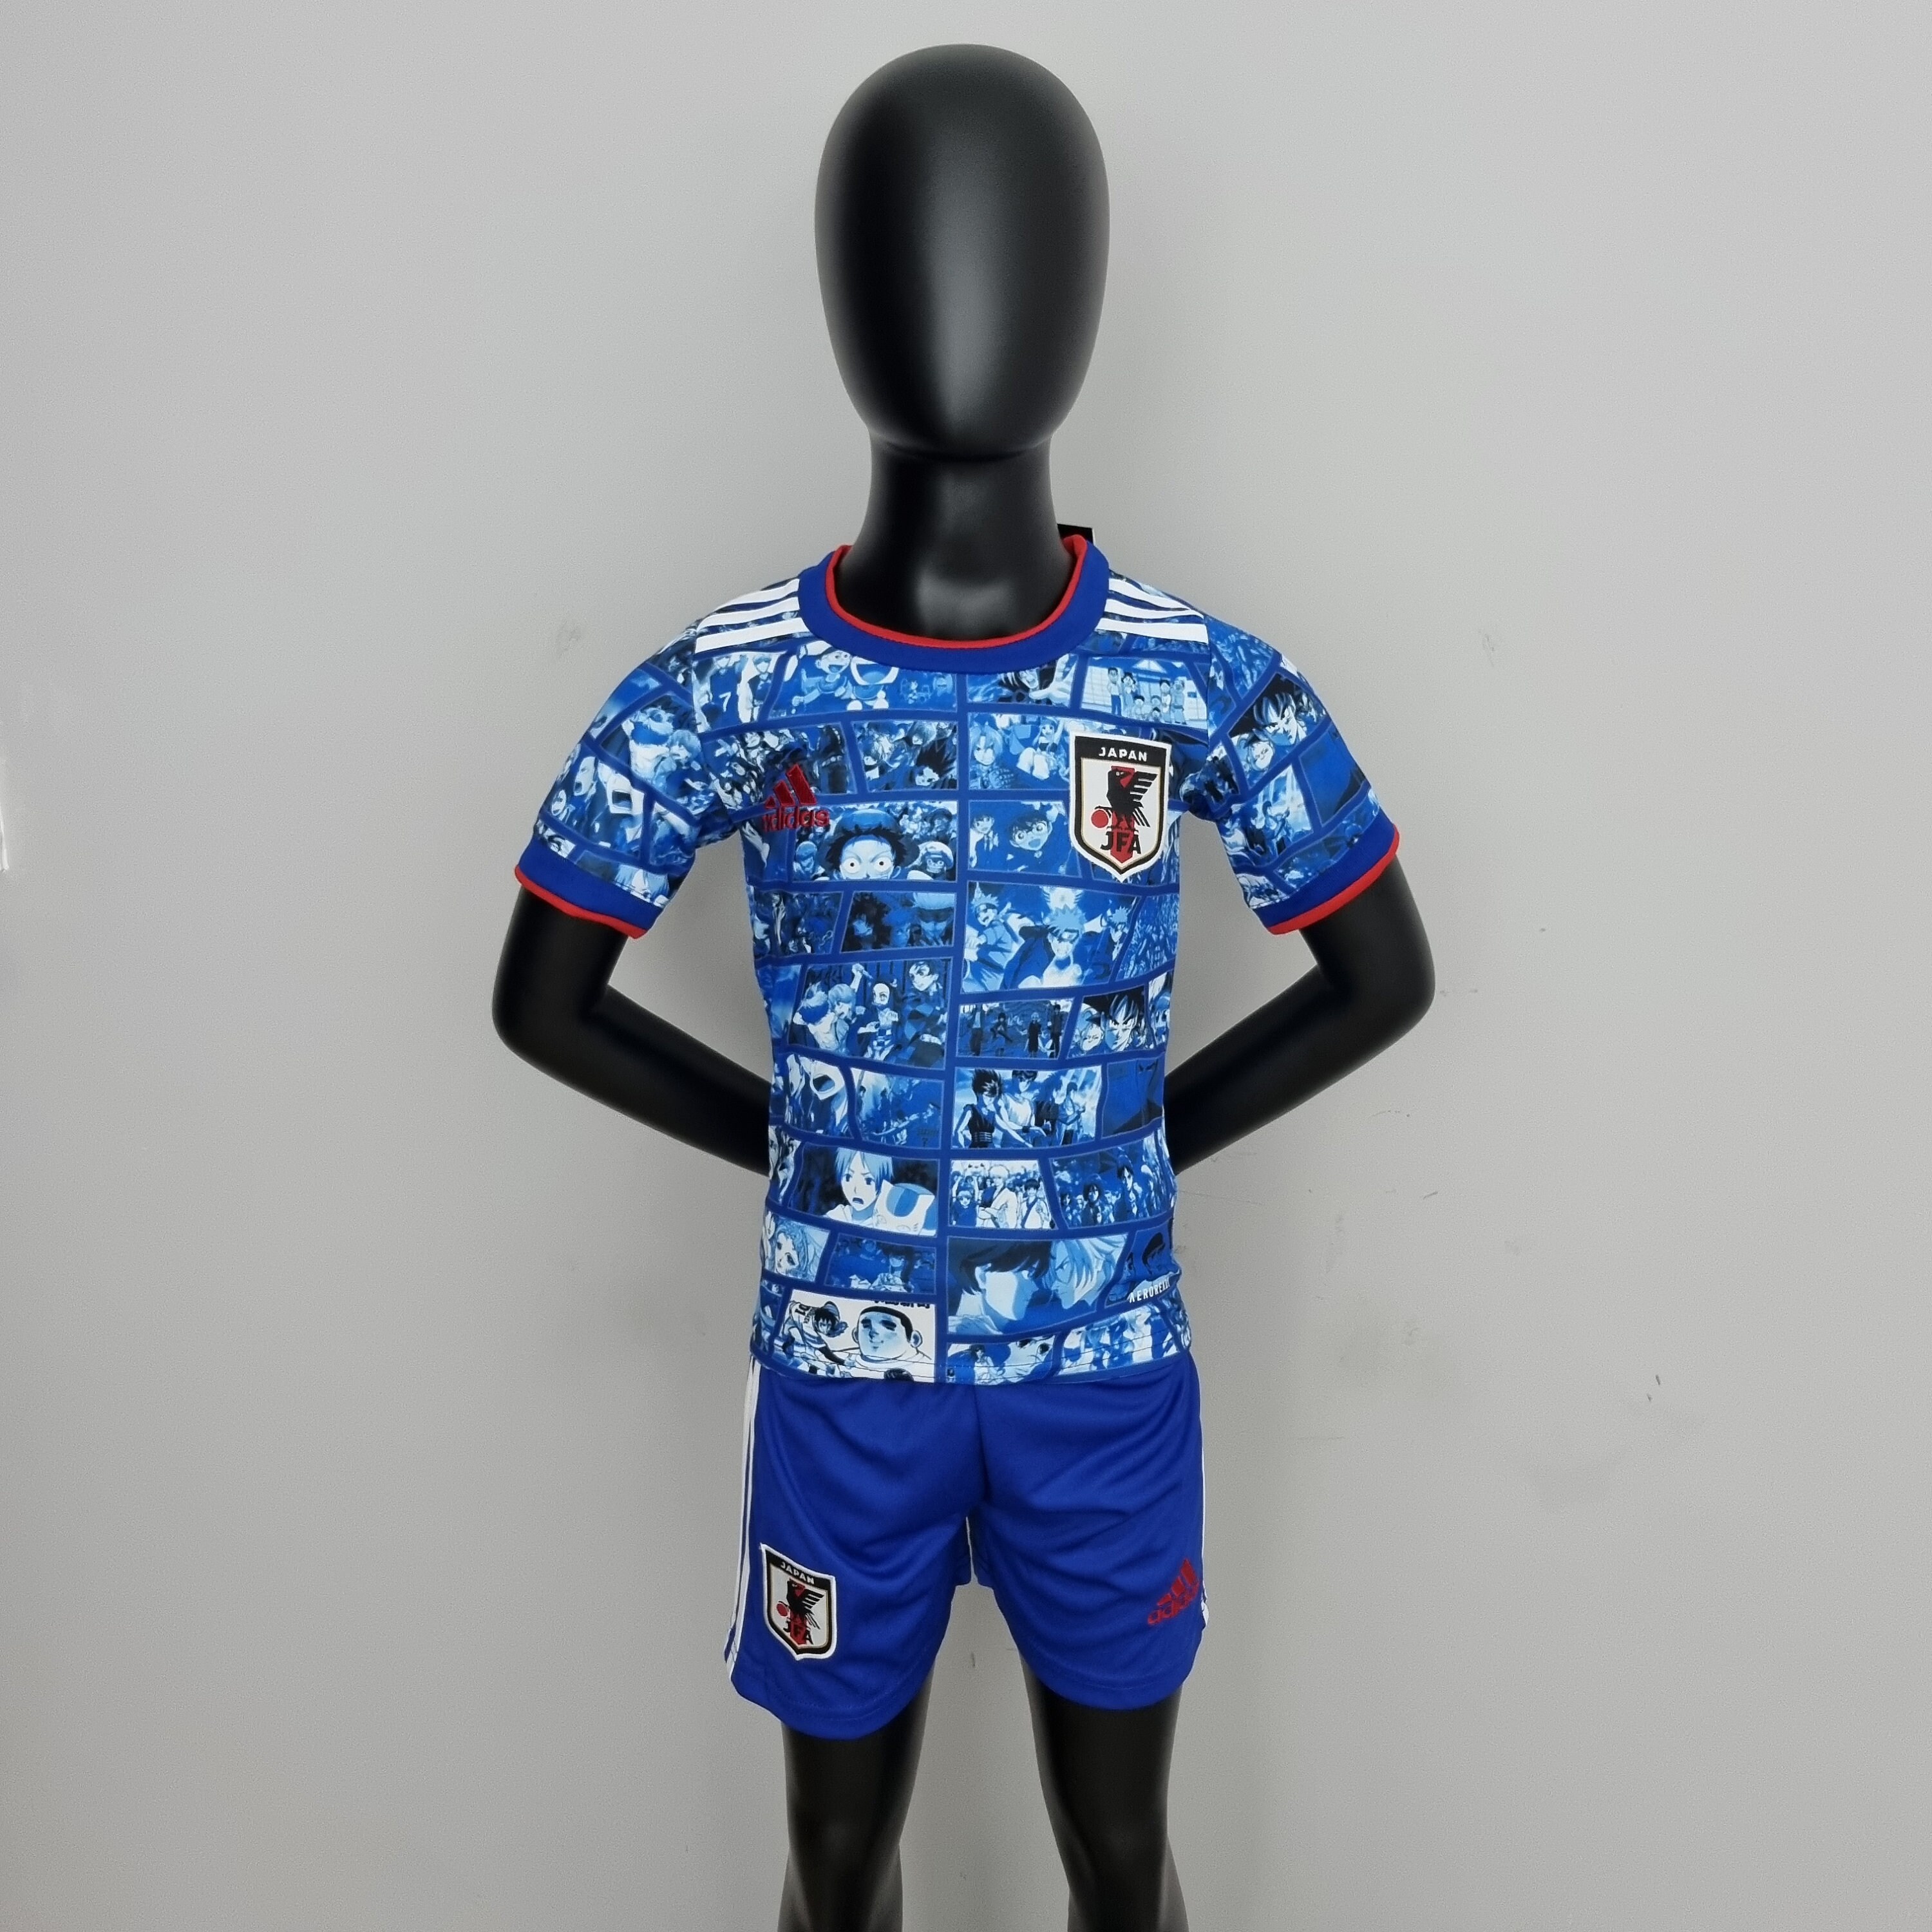 Football jersey Adult Childrens Football Suit Japan Team Anime Special  Edition Jersey Personalized Football Jersey Soccer Jersey Kits TShirt   Shorts  Socks Size  Special Edition 1018 Buy Online at Best